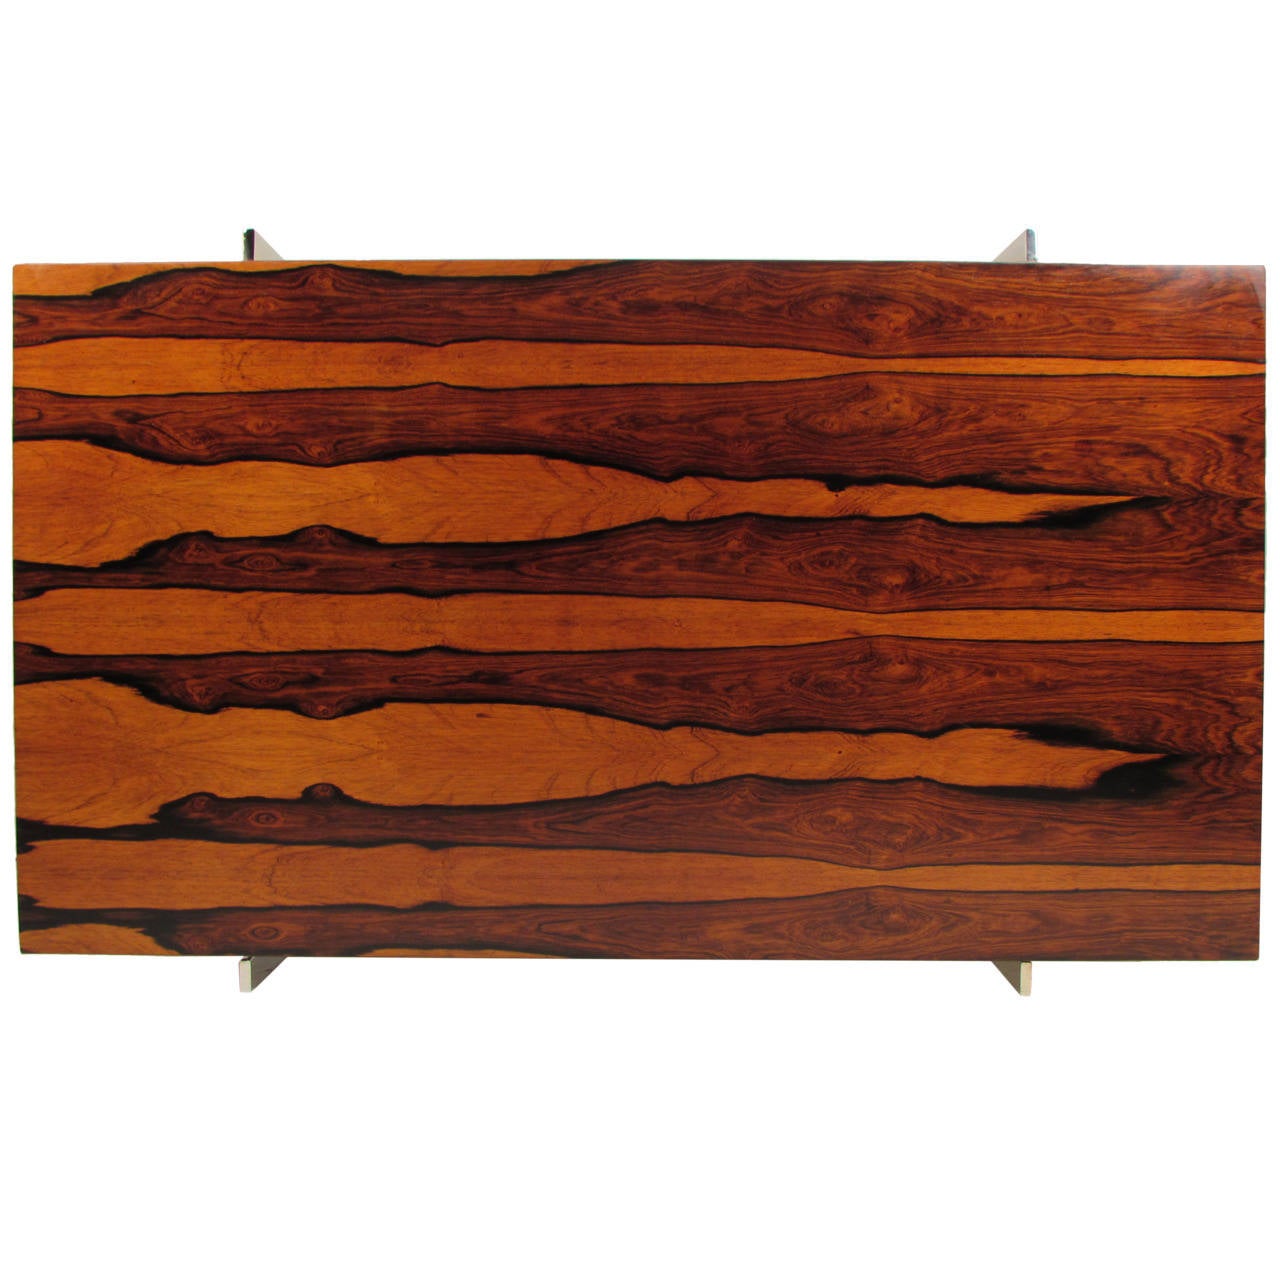 Striking custom Milo Baughman for Thayer Coggin rosewood and nickel-plated steel writing table or desk. Incredible grain with color variations within the rosewood running from blonde to black. Retains its original Thayer Coggin label.

See this item